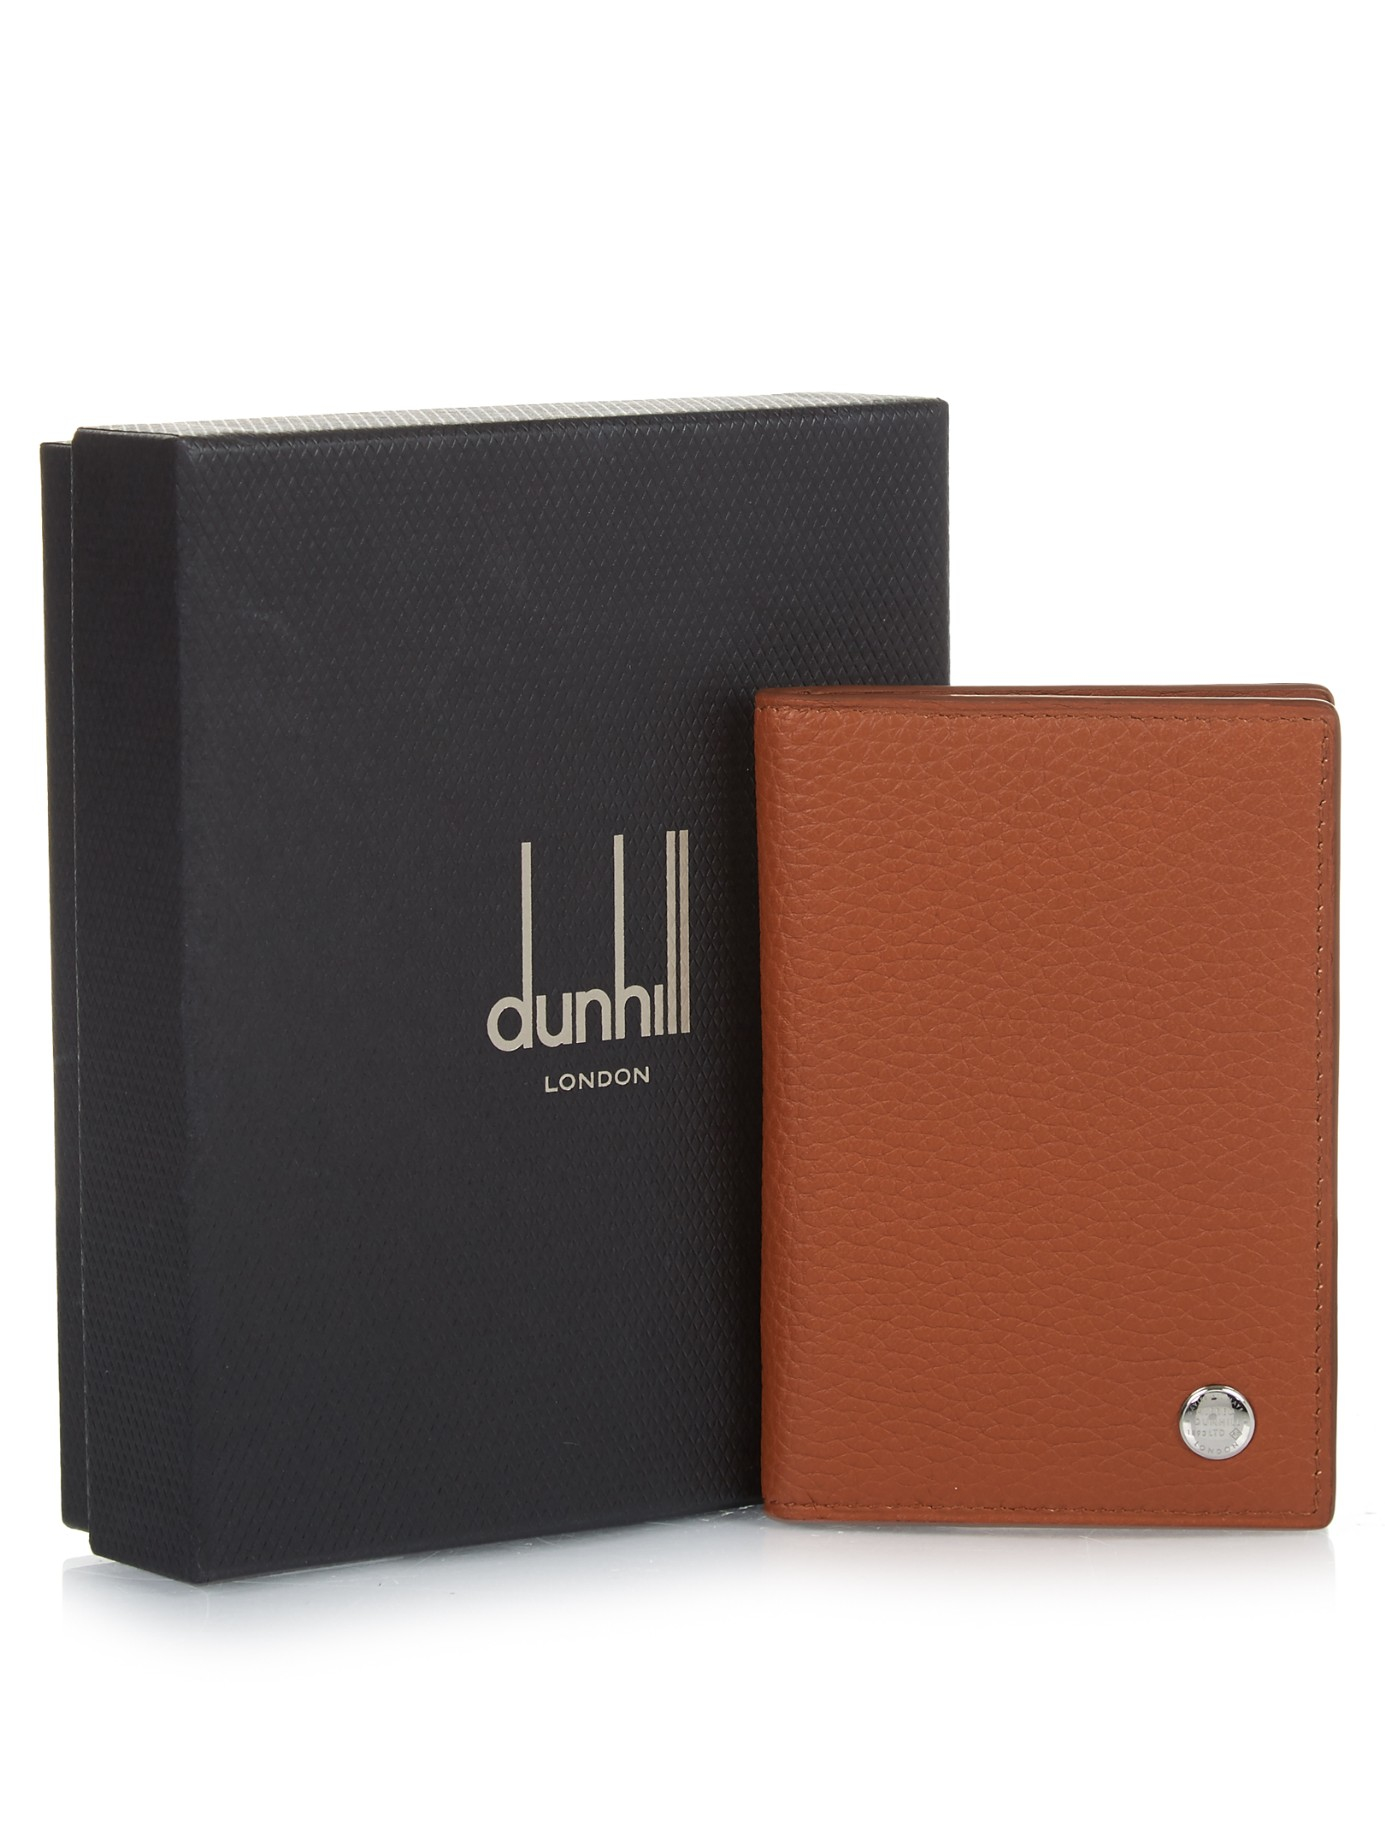 Dunhill Bi-fold Leather Wallet in Brown for Men - Lyst